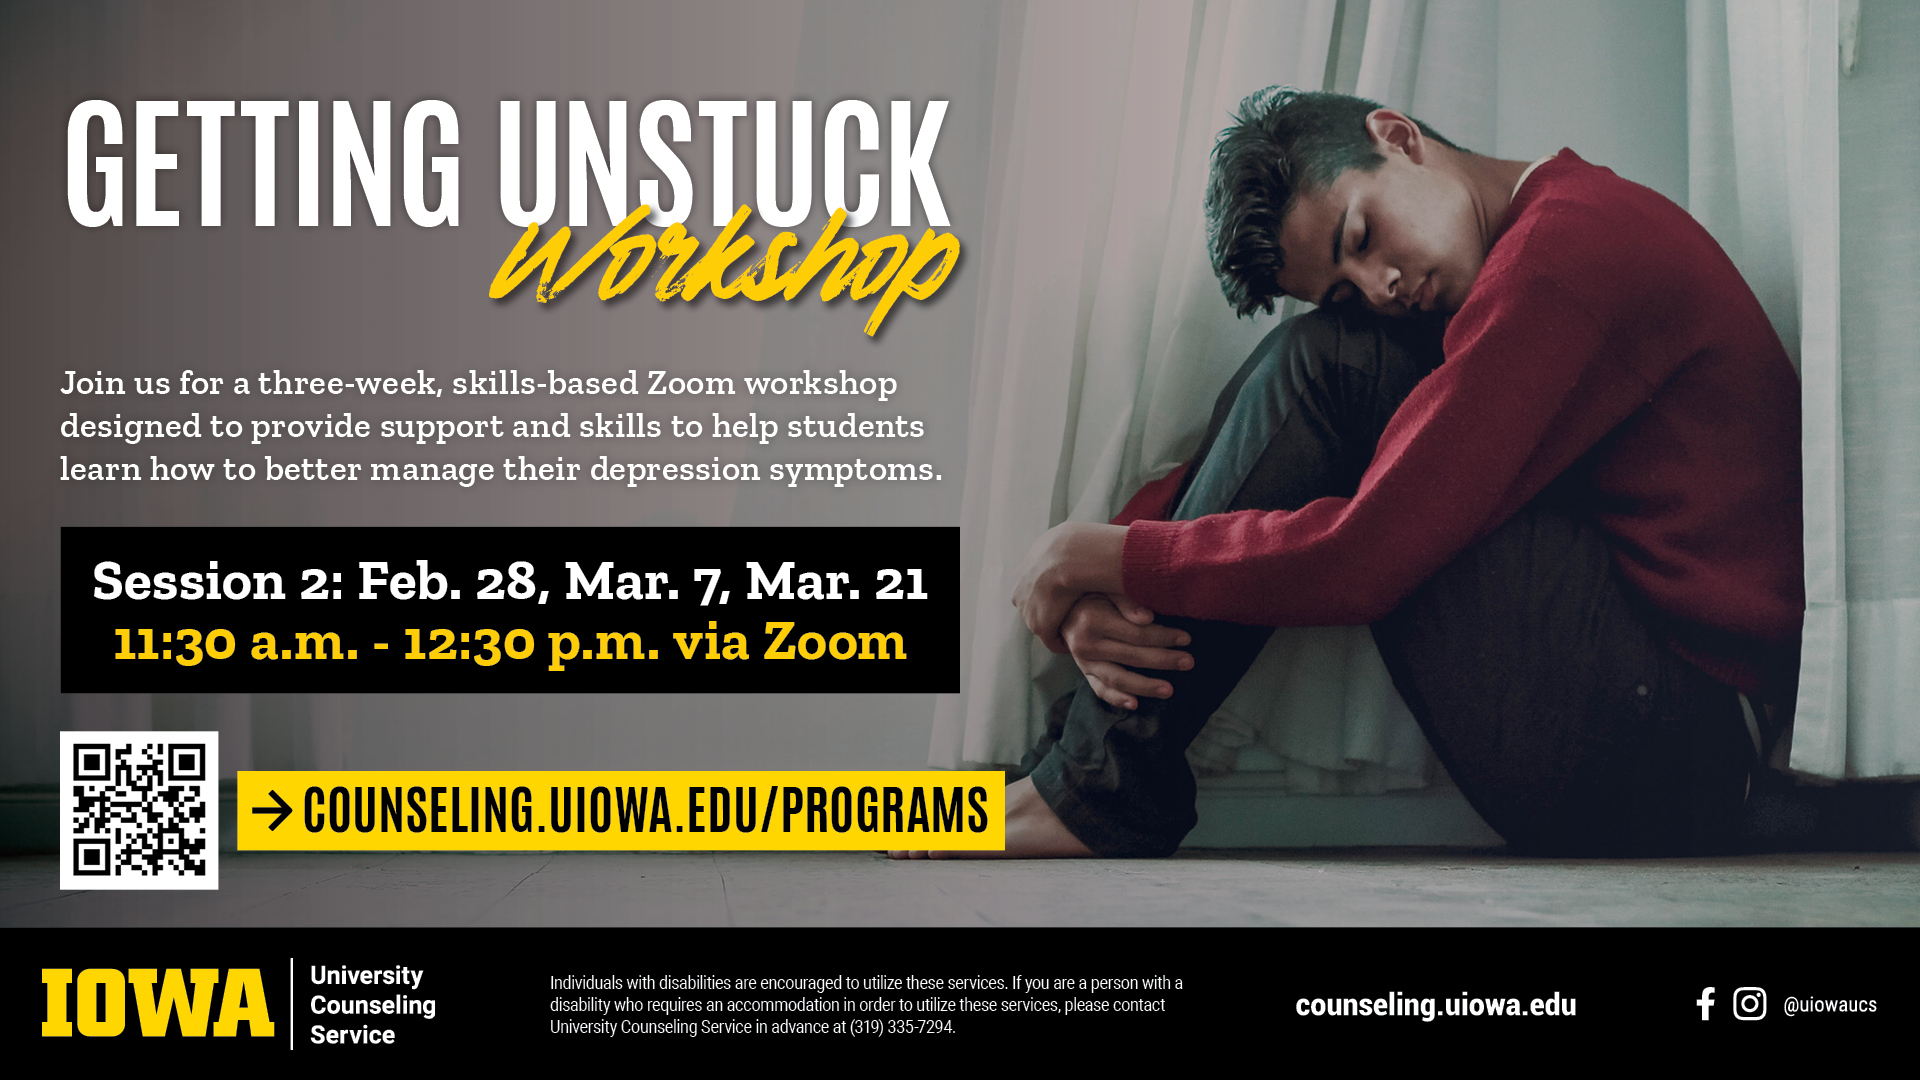 Getting Unstuck Workshop Session 2: feb 28, March 7, March 23, 11:30am-12:30pm via zoom